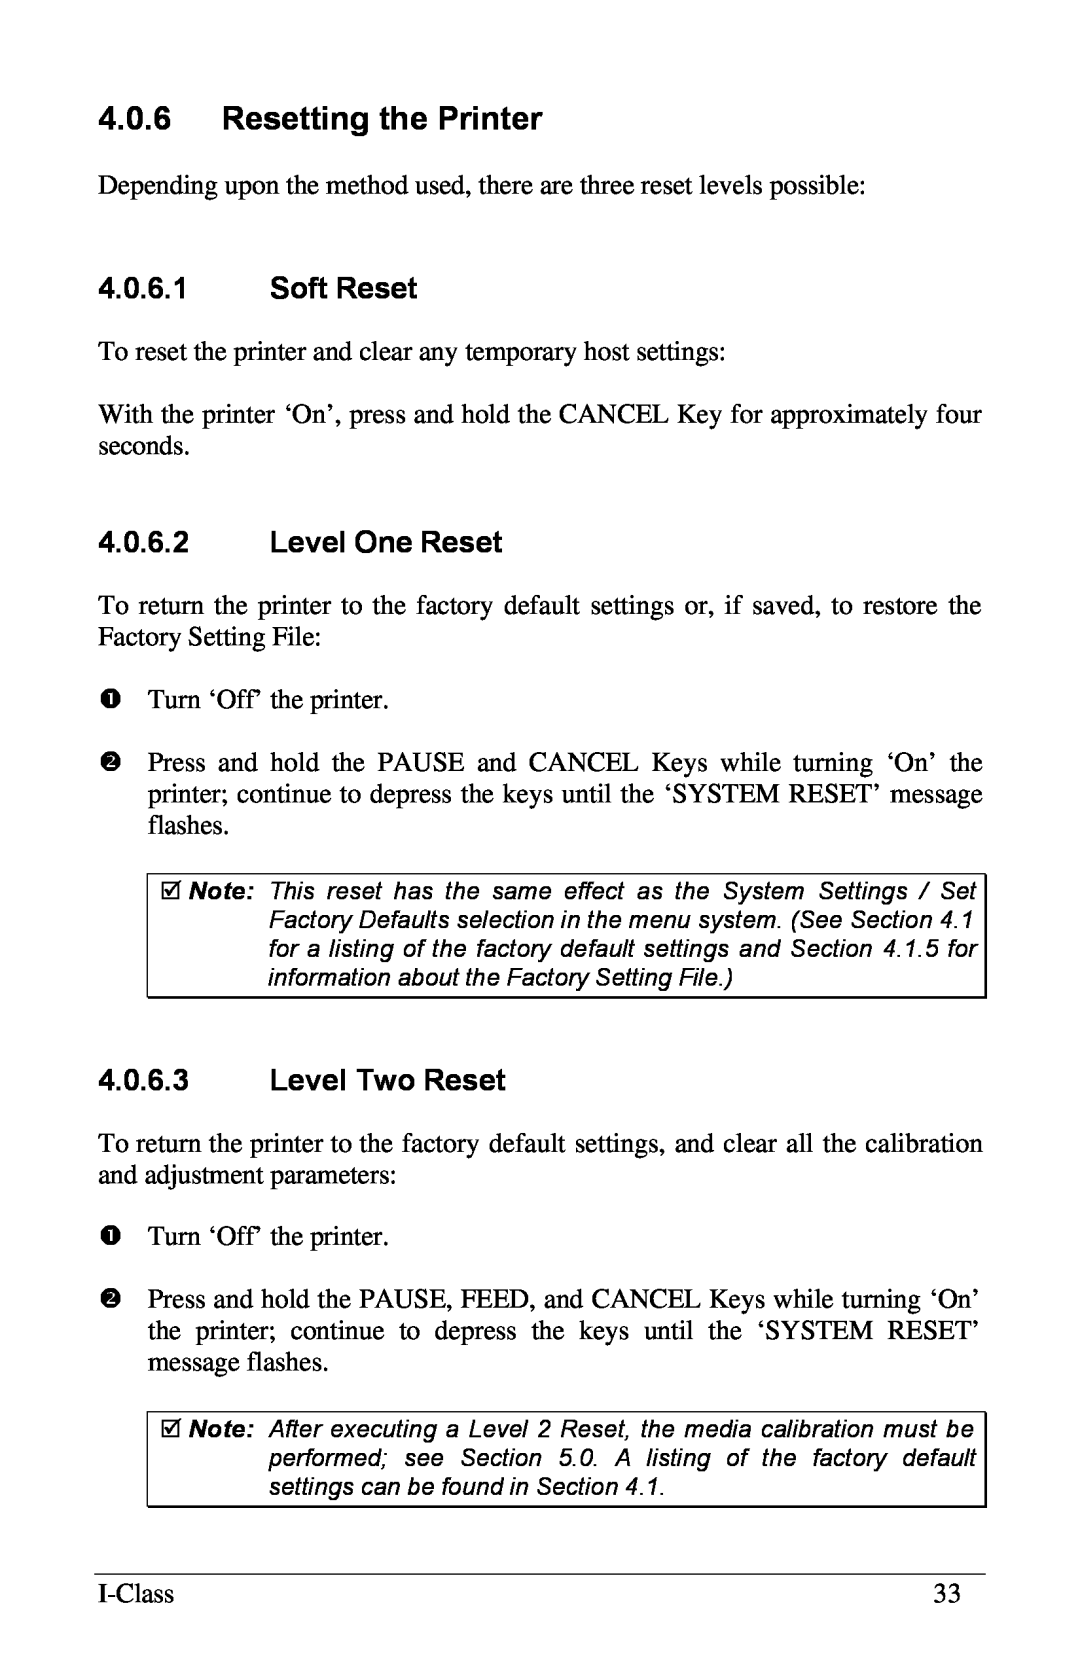 Xerox I Class manual 4.0.6Resetting the Printer, 4.0.6.1Soft Reset, 4.0.6.2Level One Reset, 4.0.6.3Level Two Reset 